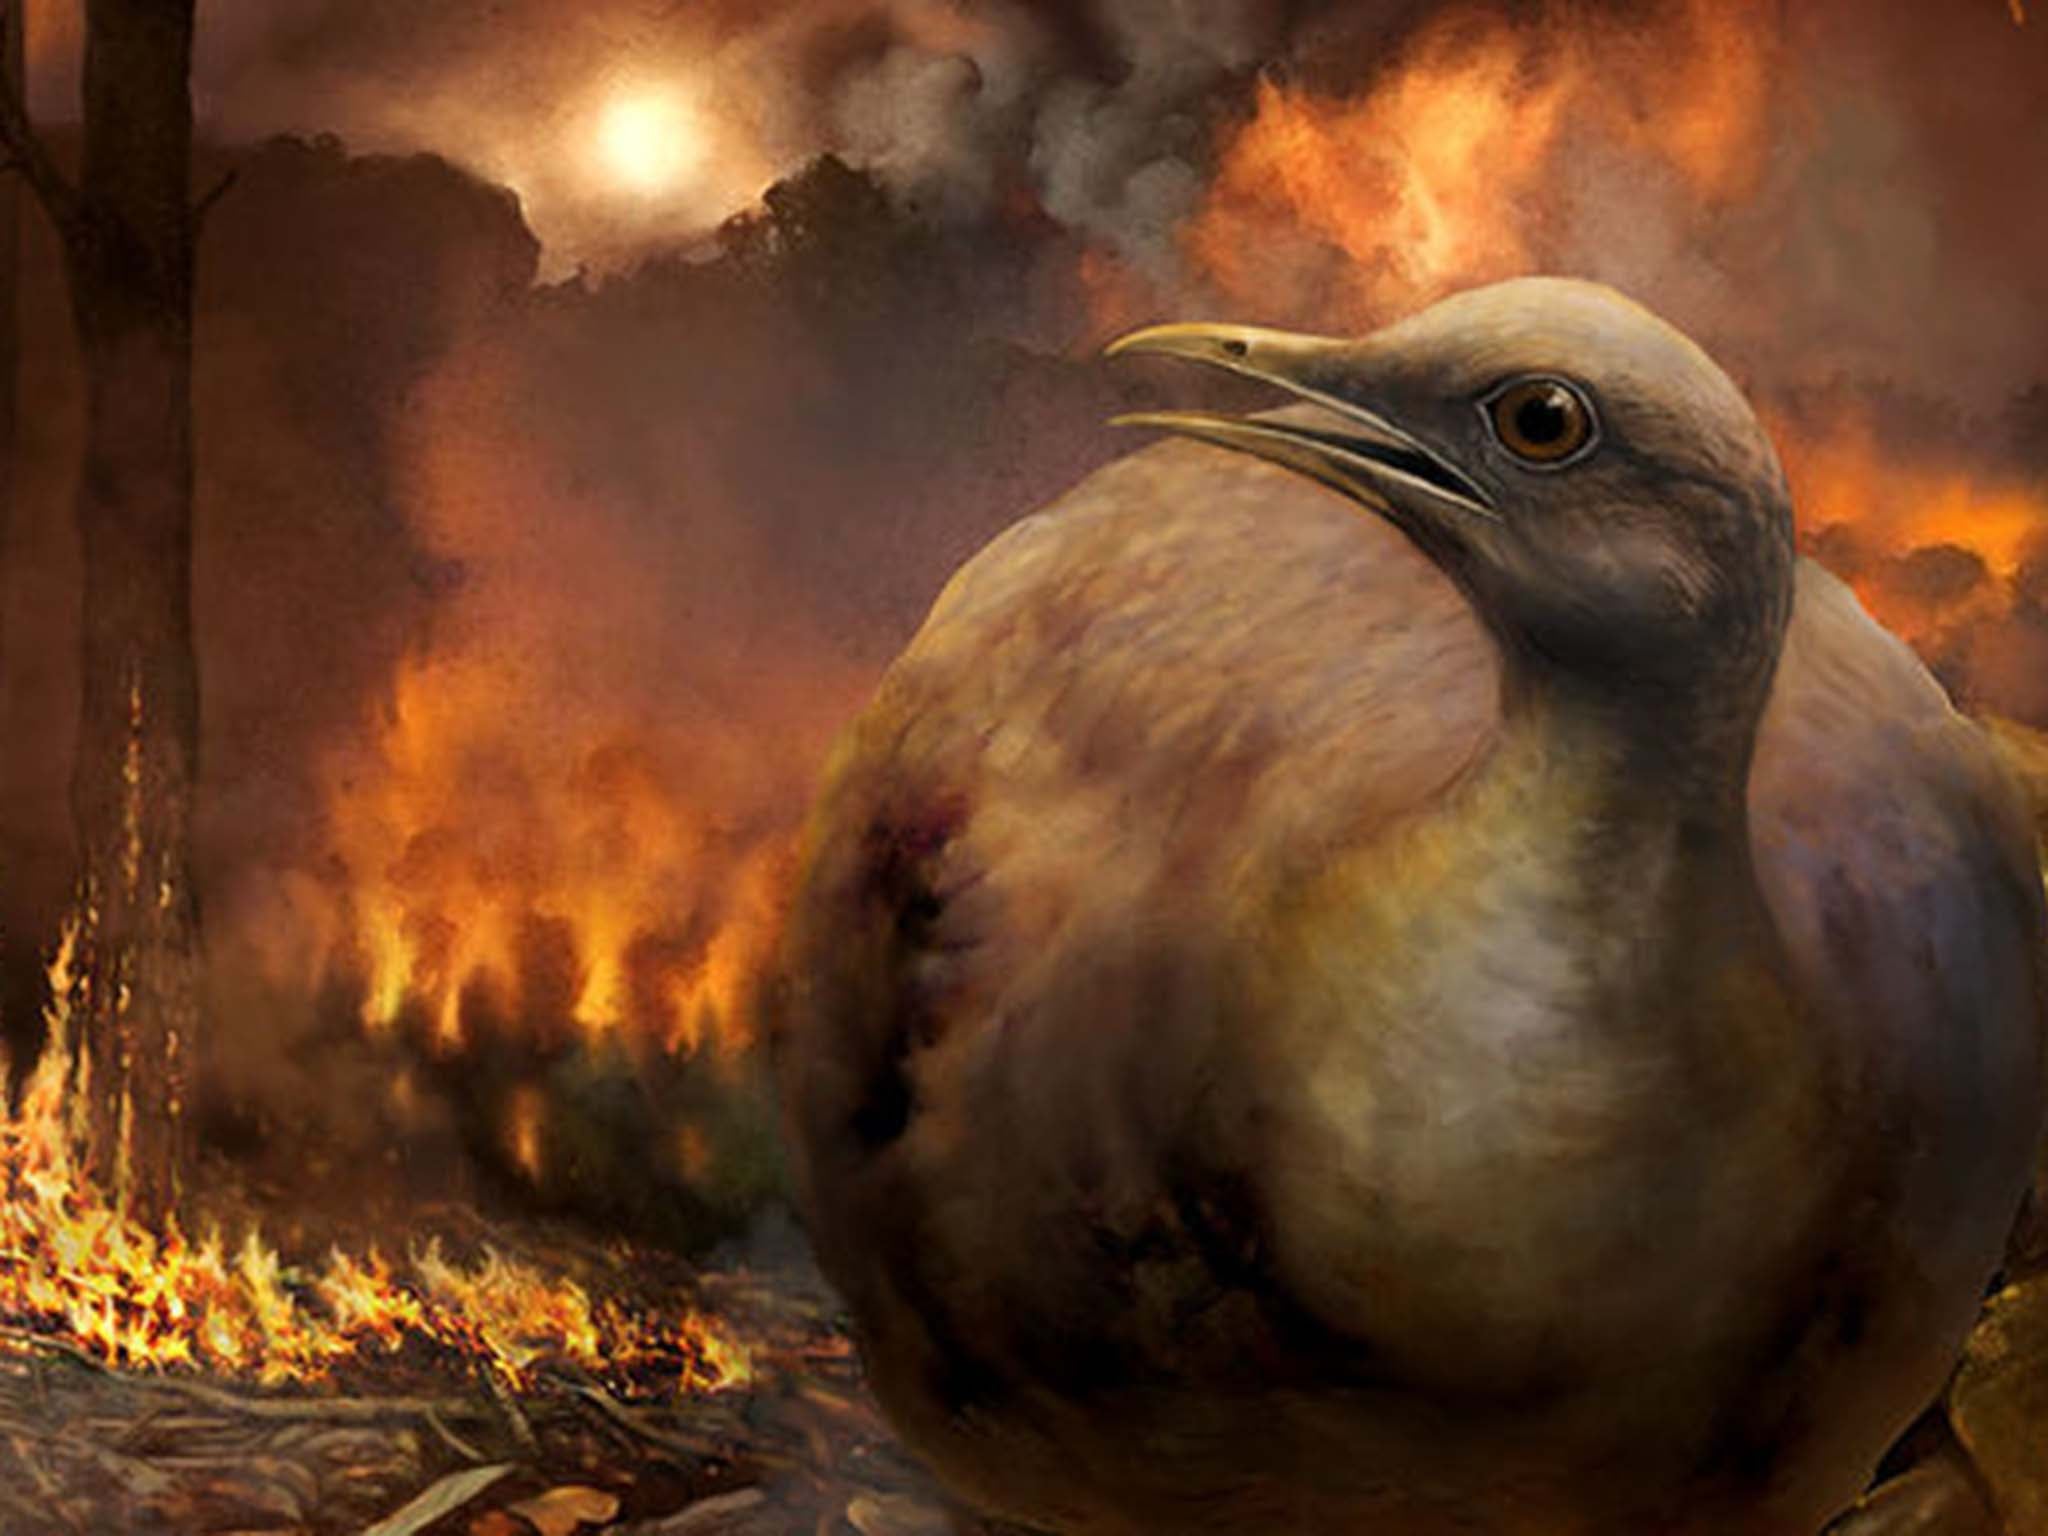 The ancestors of as few as five major bird lineages survived the apocalyptic event